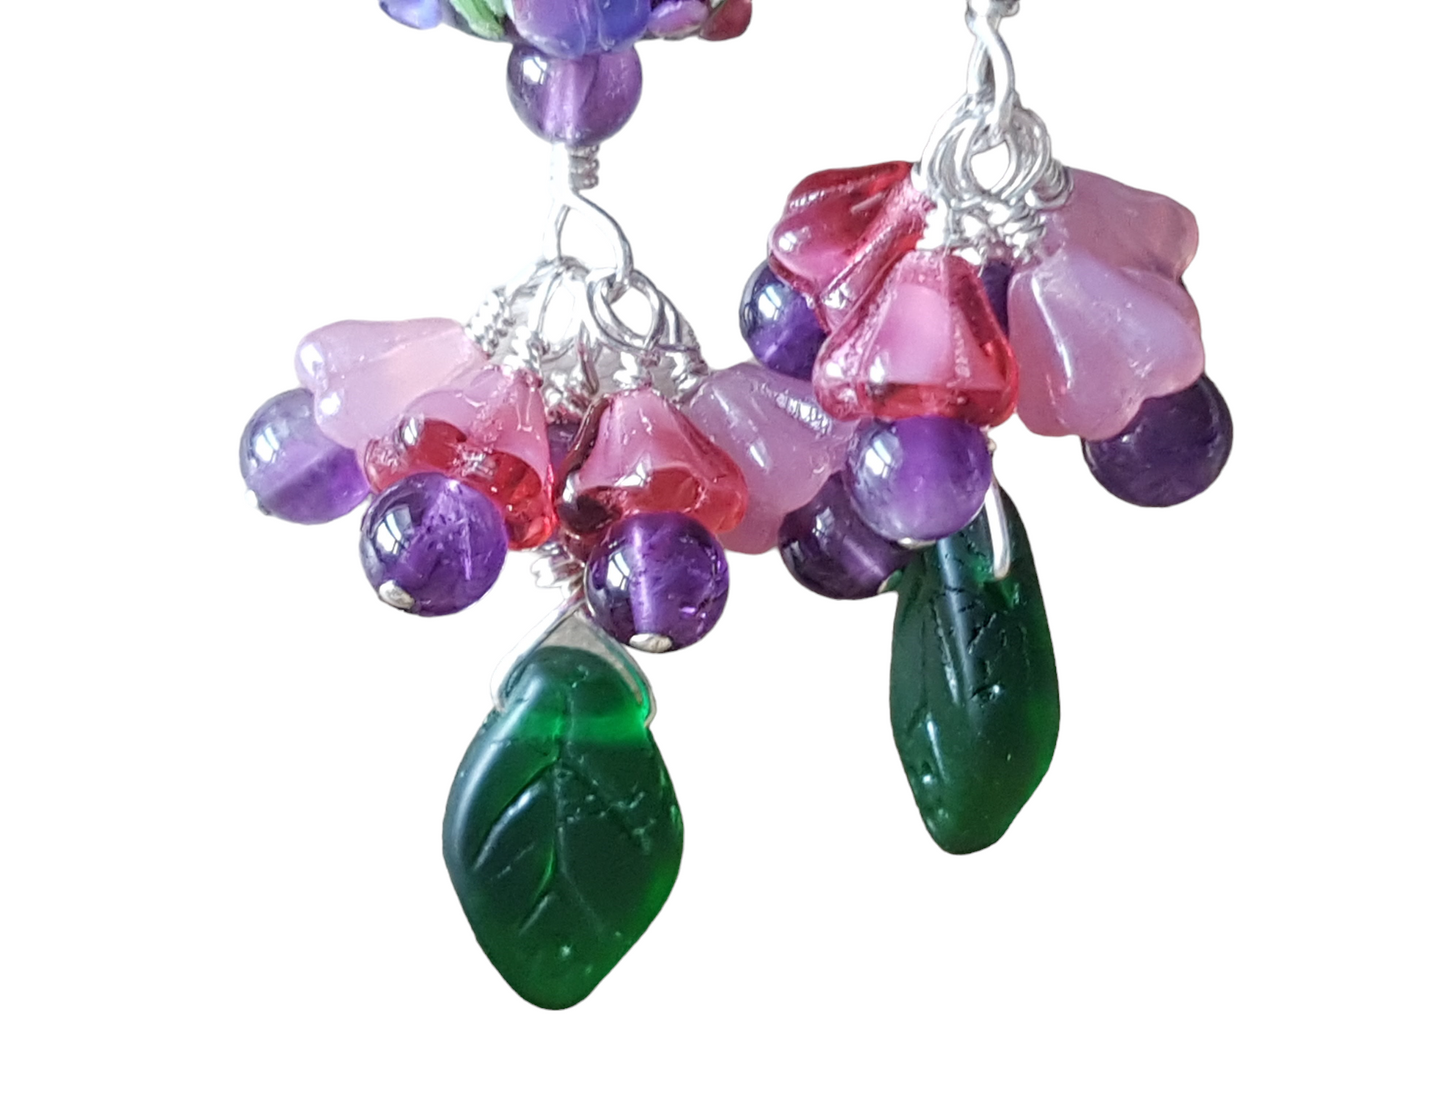 Long Sterling Silver Floral earrings with Amethyst beads, Large Lamprork glass bead and dangling pink flowers and green leaf’s, 